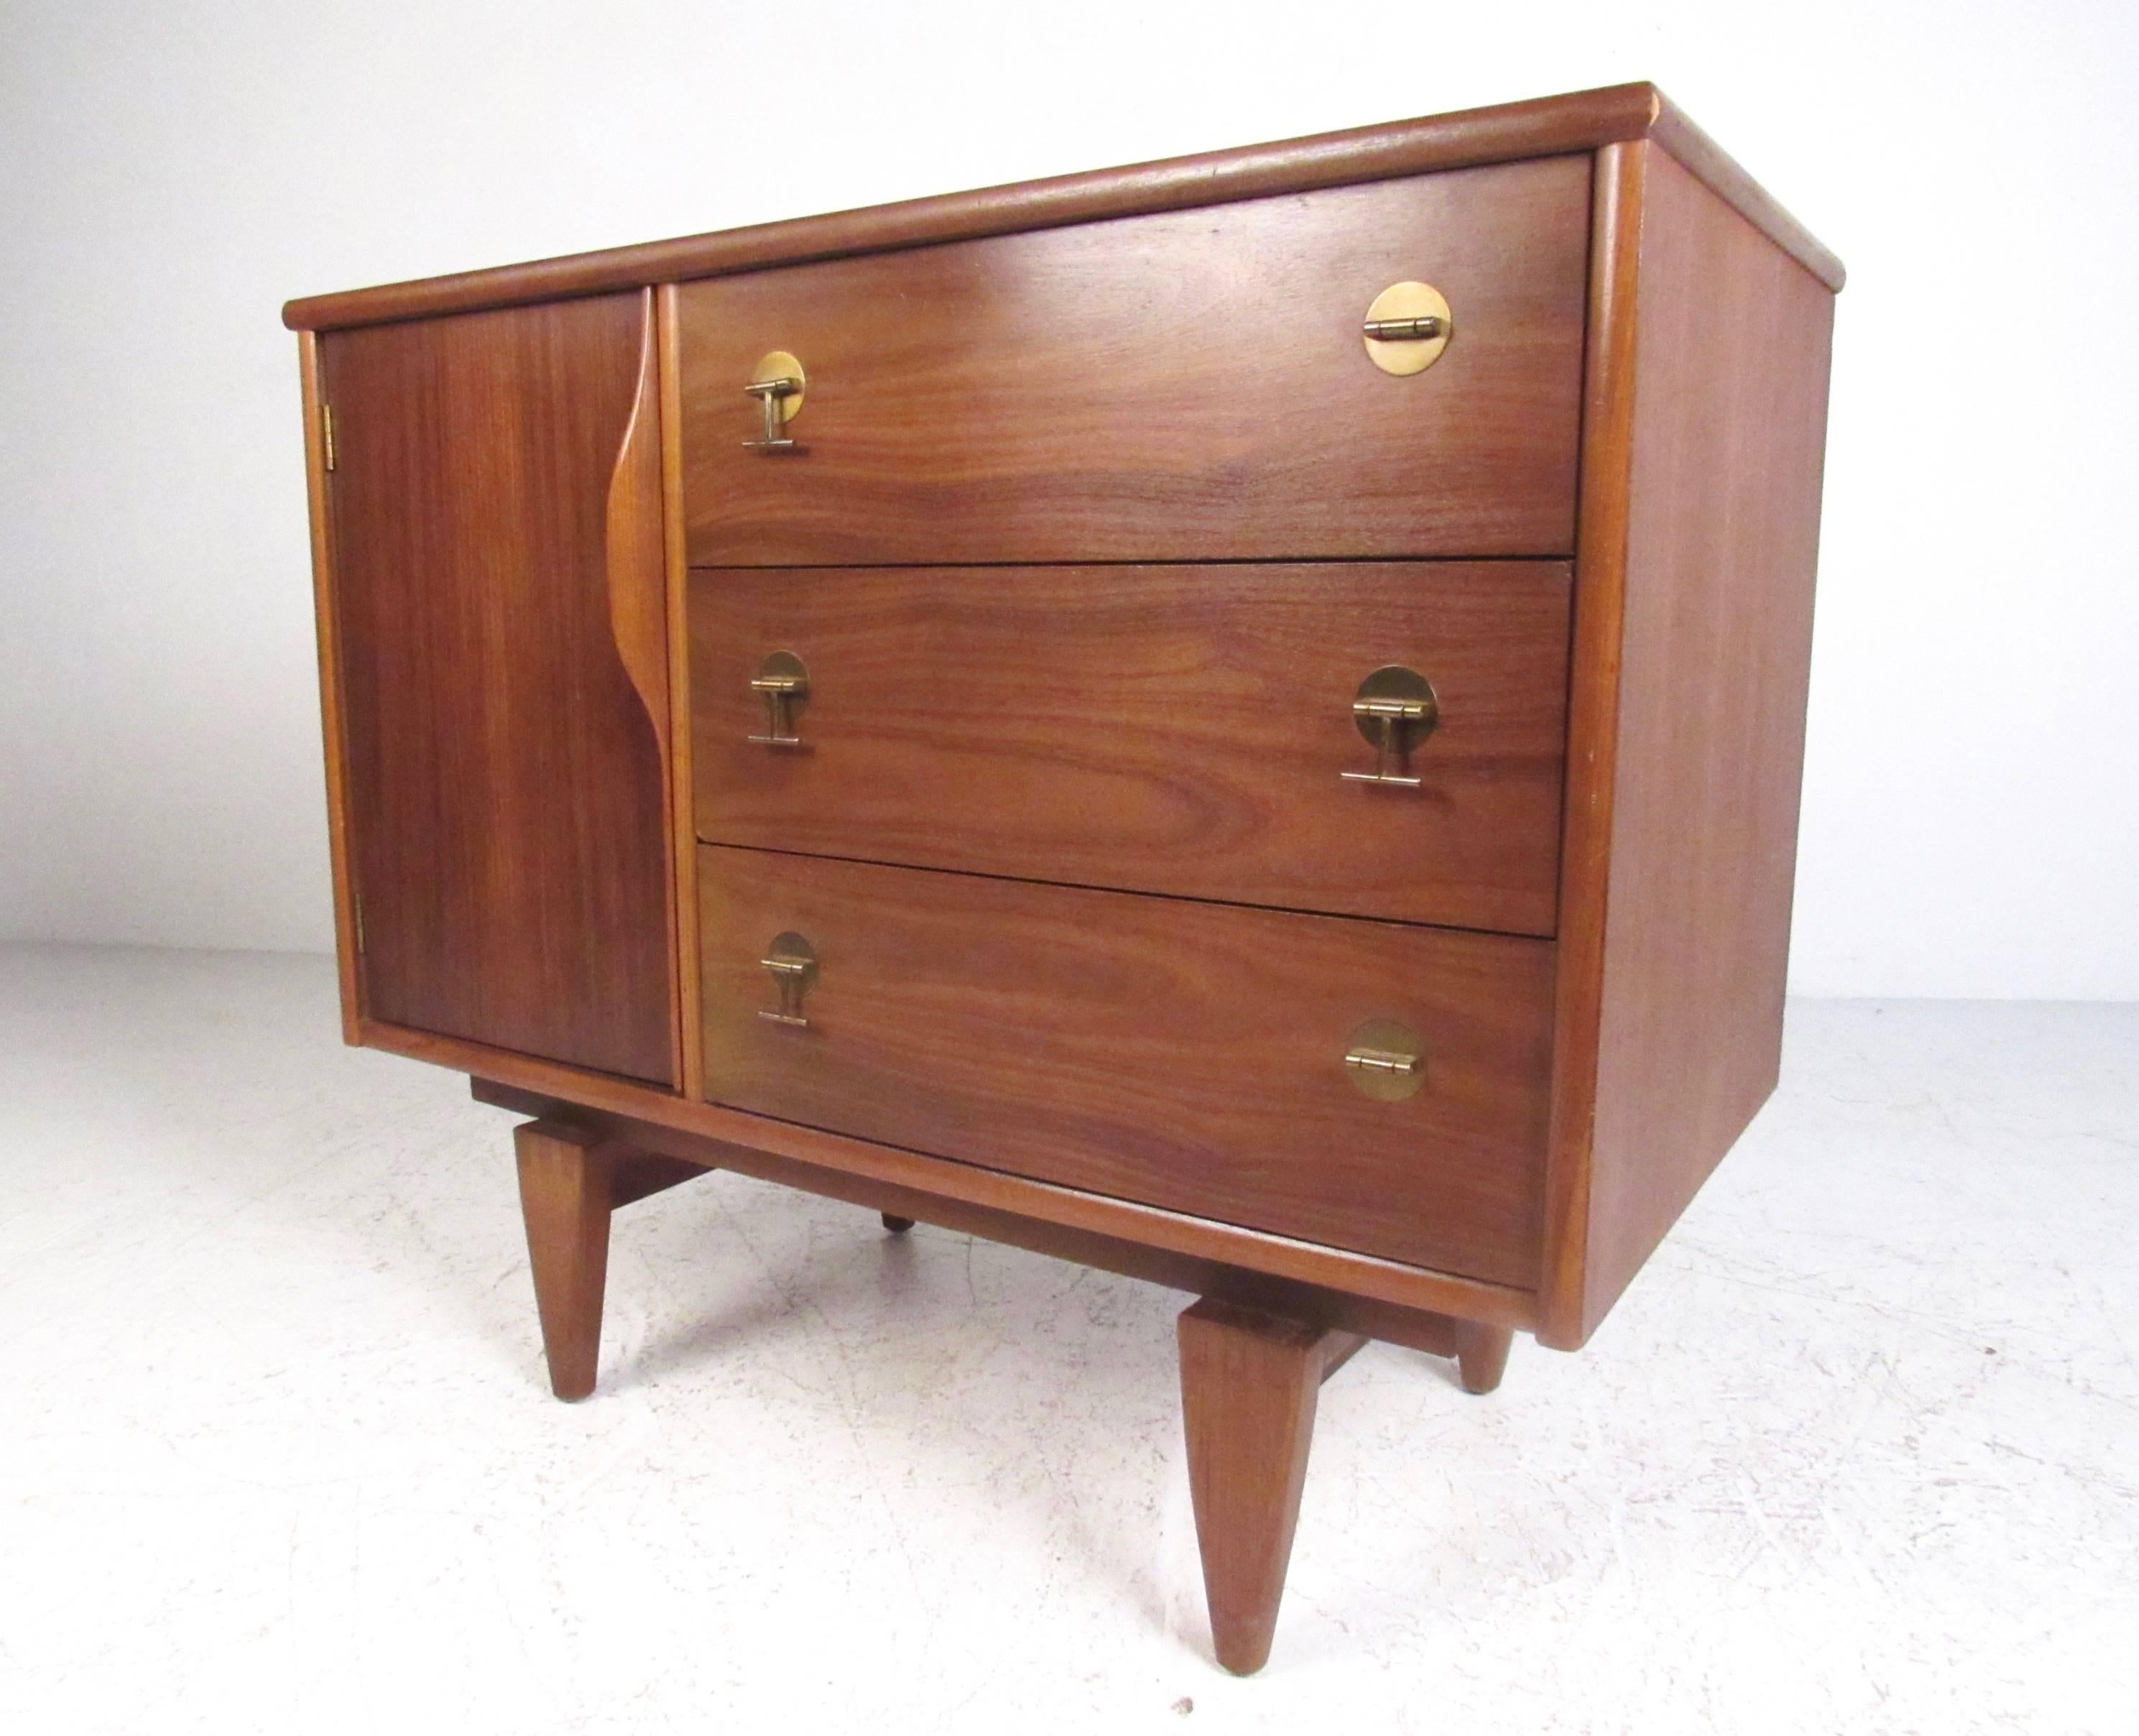 This stylish vintage walnut cabinet by Stanley furniture features sculpted hardwood handle, unique brass pulls, and tapered dovetail legs. Unique Mid-Century Modern style and pull-out shelved cabinet space make this a beautiful addition to home or